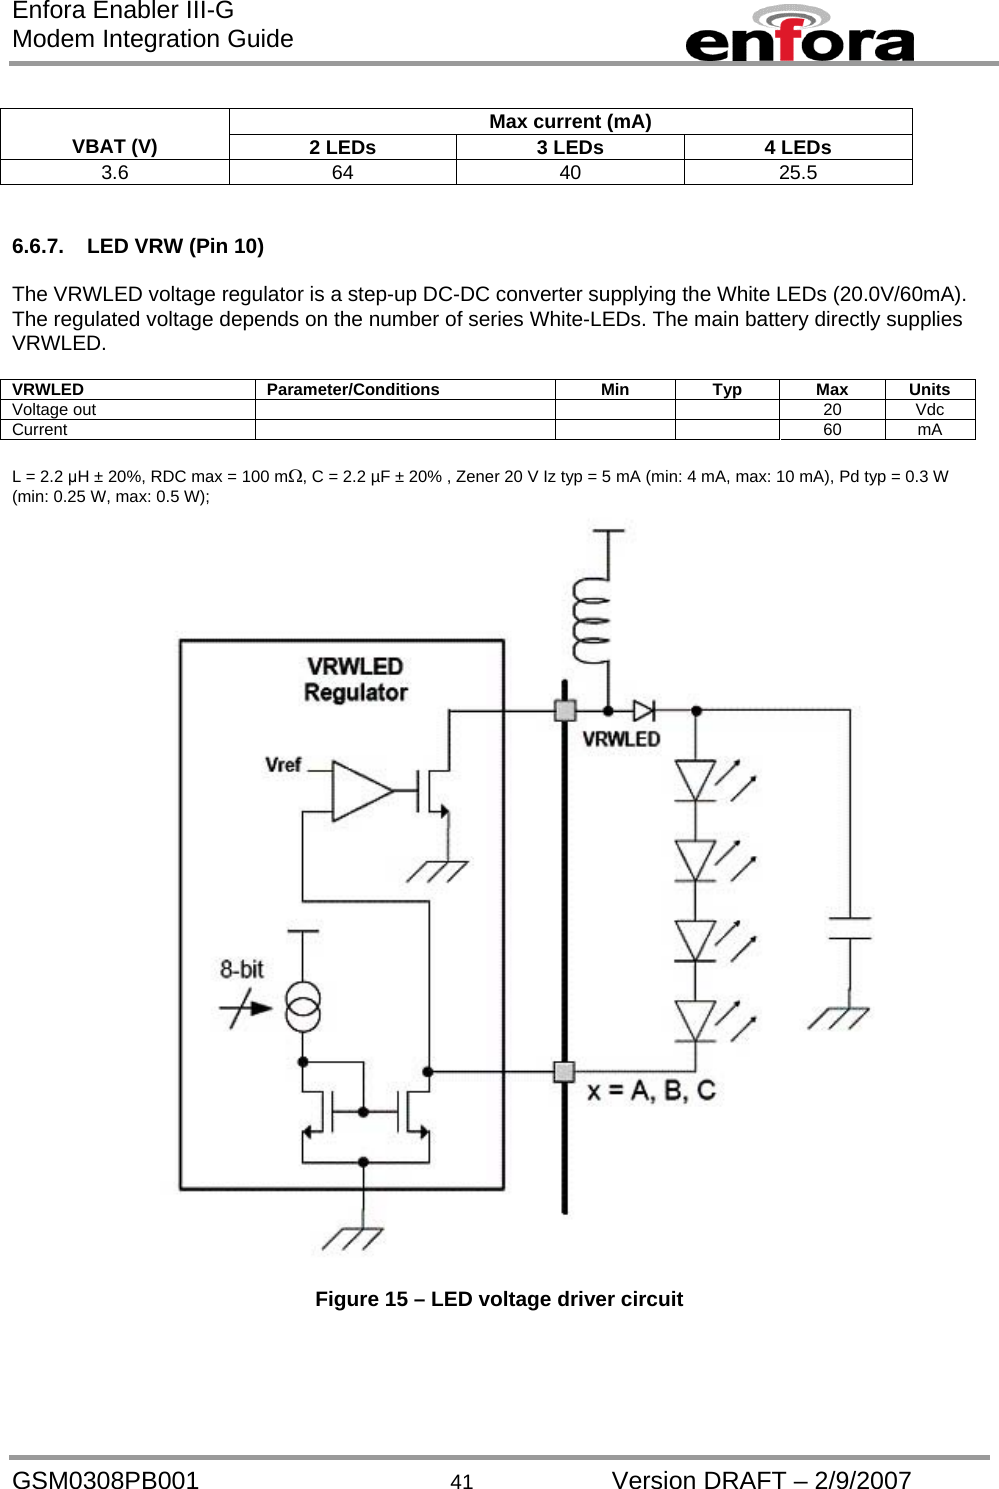 Enfora Enabler III-G Modem Integration Guide  Max current (mA) VBAT (V)  2 LEDs 3 LEDs  4 LEDs 3.6   64  40   25.5   6.6.7.  LED VRW (Pin 10) The VRWLED voltage regulator is a step-up DC-DC converter supplying the White LEDs (20.0V/60mA). The regulated voltage depends on the number of series White-LEDs. The main battery directly supplies VRWLED.  VRWLED Parameter/Conditions Min Typ Max Units Voltage out        20  Vdc Current     60 mA  L = 2.2 H ± 20%, RDC max = 100 mΩ, C = 2.2 µF ± 20% , Zener 20 V Iz typ = 5 mA (min: 4 mA, max: 10 mA), Pd typ = 0.3 W (min: 0.25 W, max: 0.5 W);  Figure 15 – LED voltage driver circuit GSM0308PB001  41  Version DRAFT – 2/9/2007 